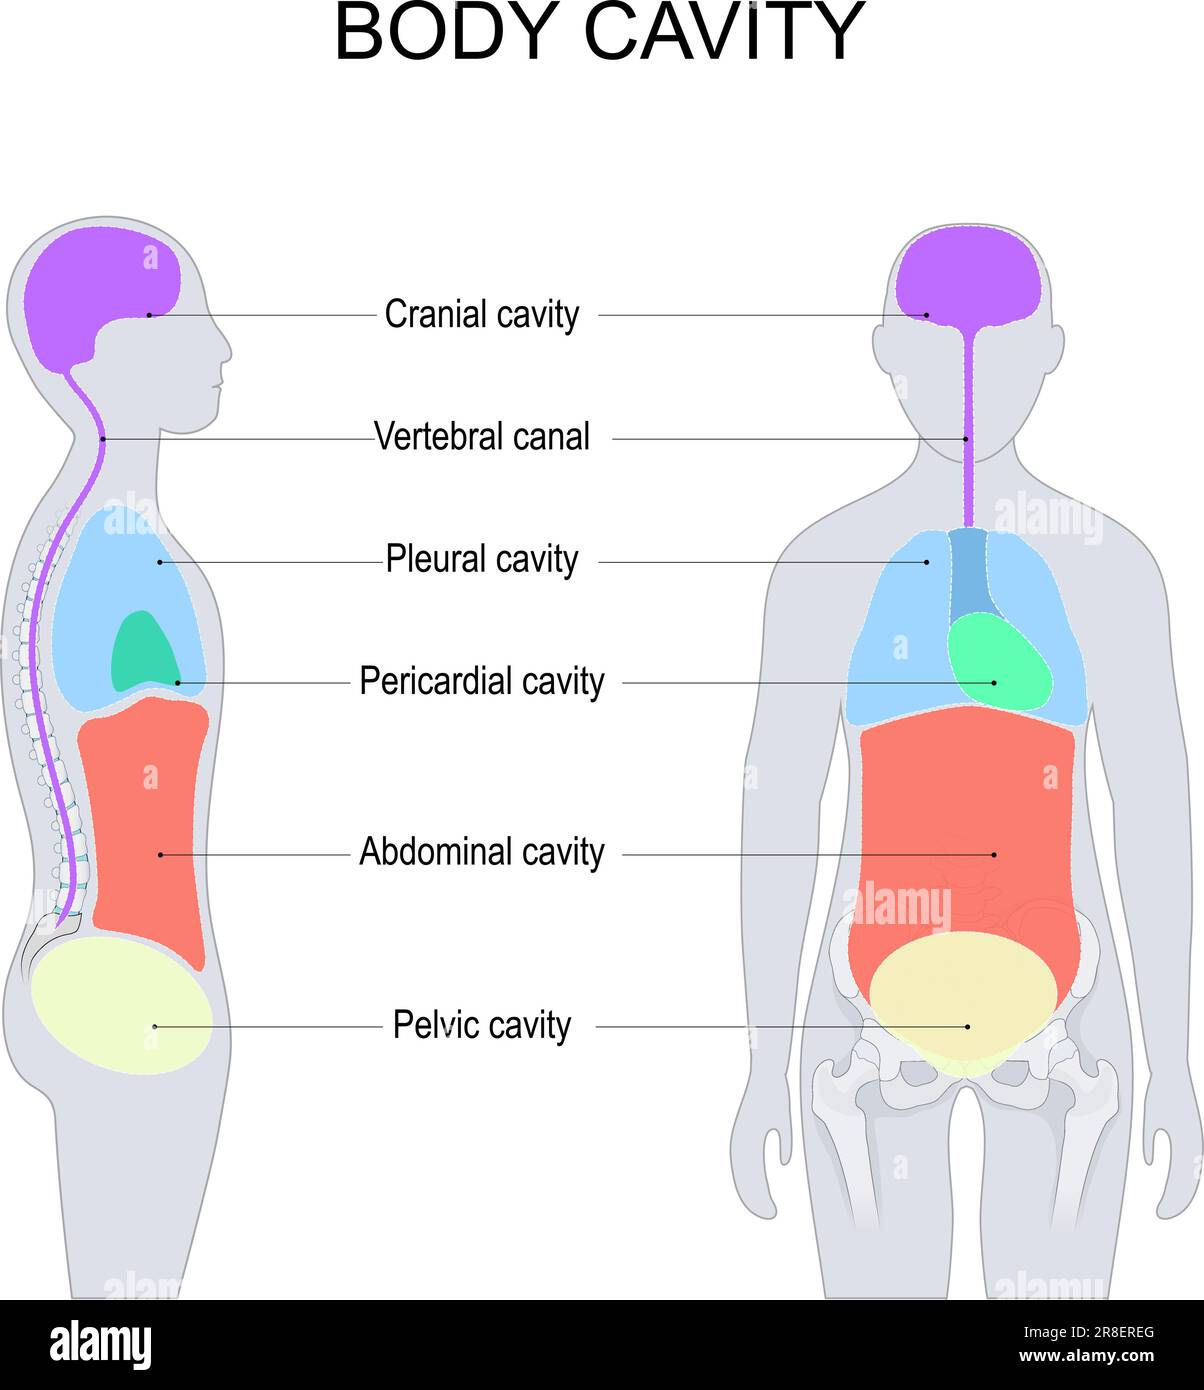 https://c8.alamy.com/comp/2R8EREG/body-cavities-dorsal-and-ventral-body-cavities-for-internal-organs-or-viscera-labelled-vector-illustration-front-and-side-view-of-a-human-2R8EREG.jpg